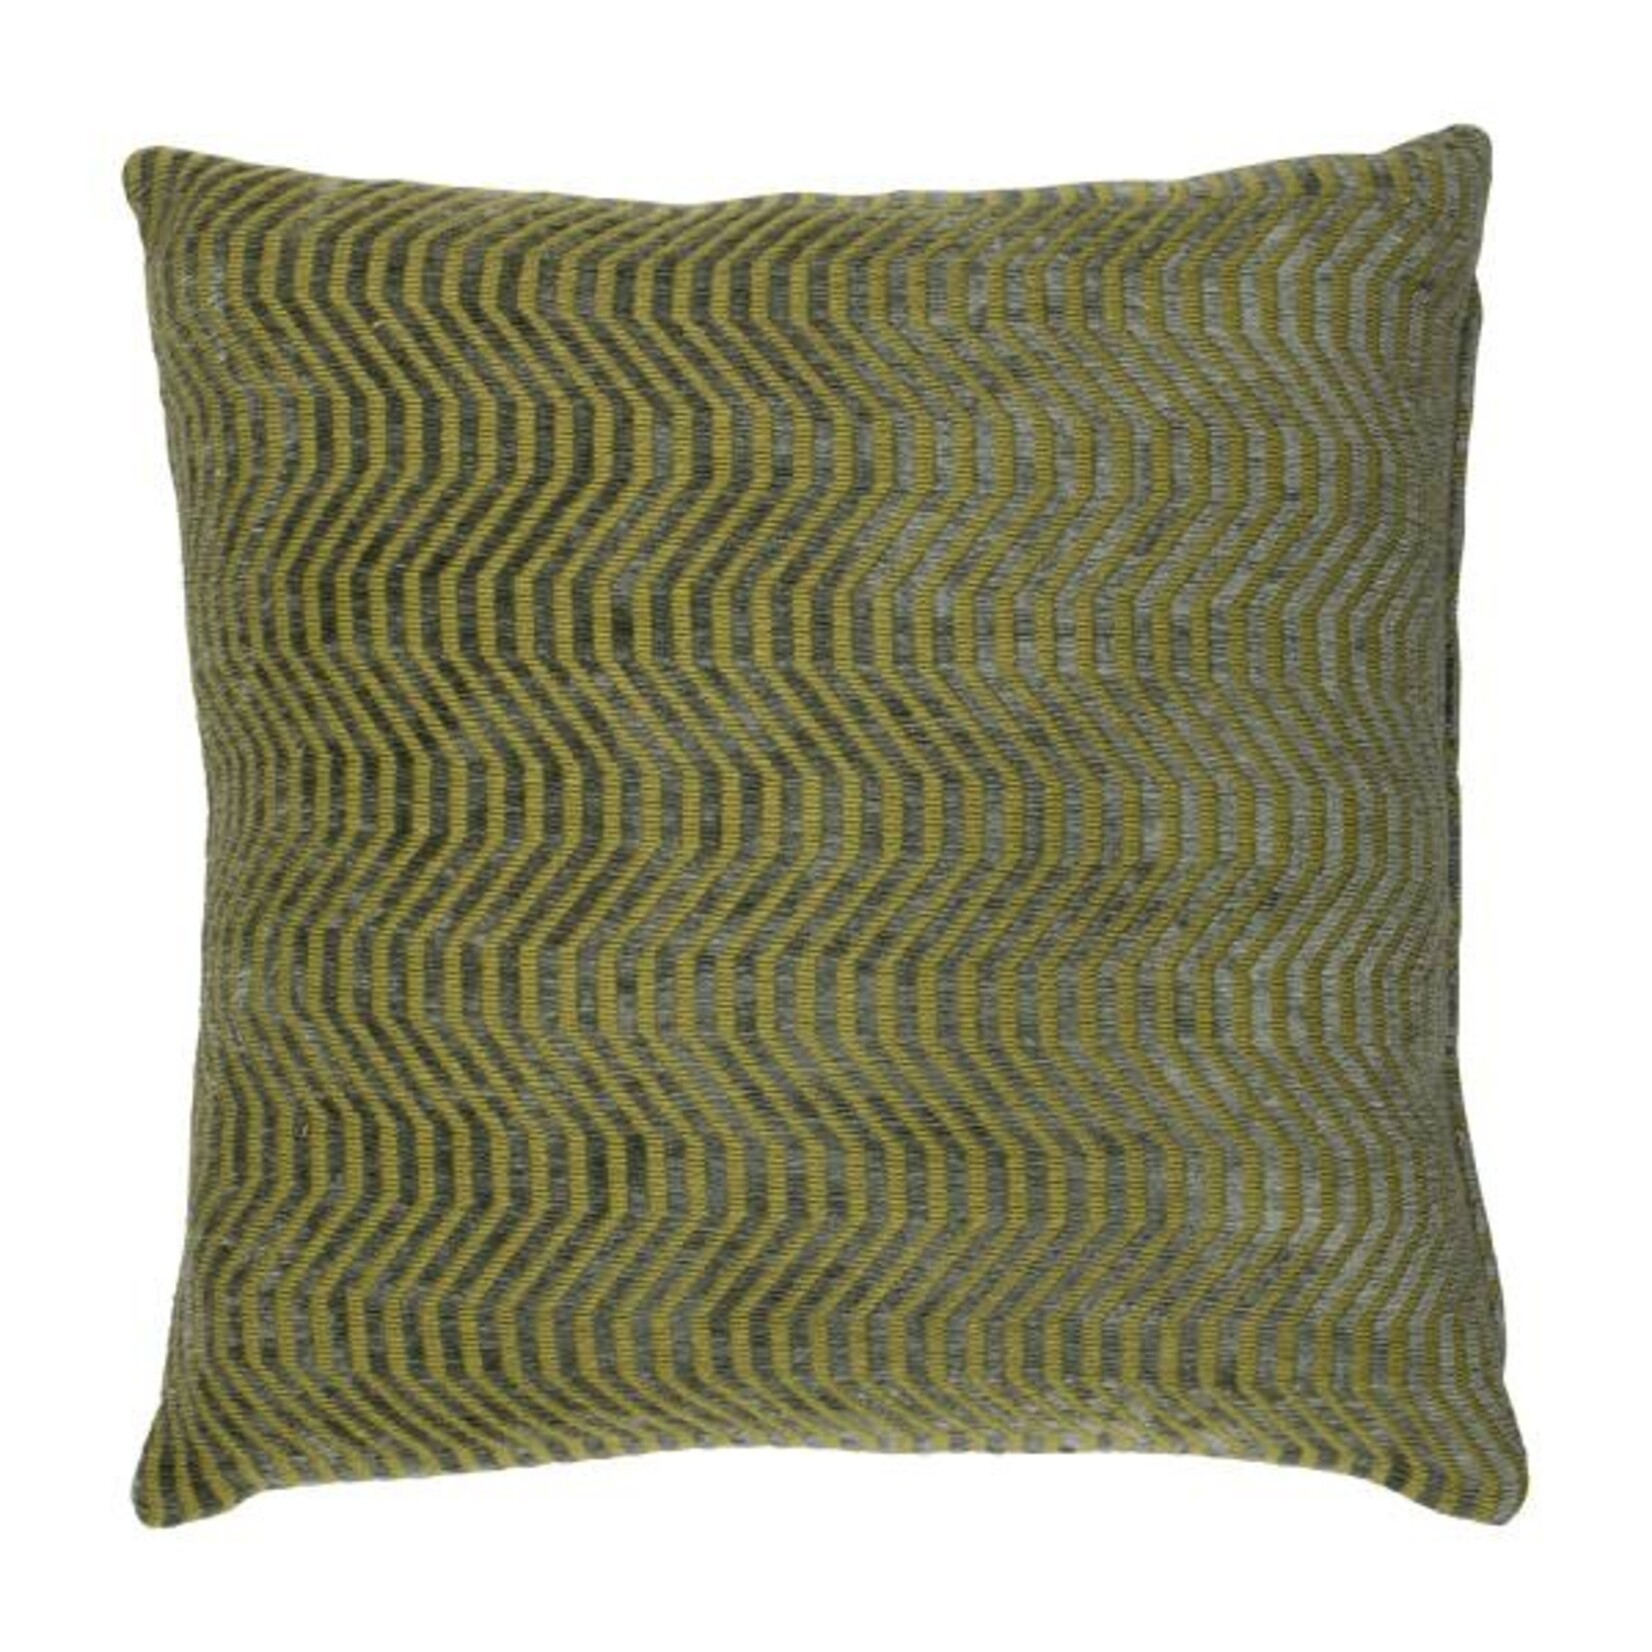 Gabby Zrubek Lime 22x22 Pillow with Feather Insert